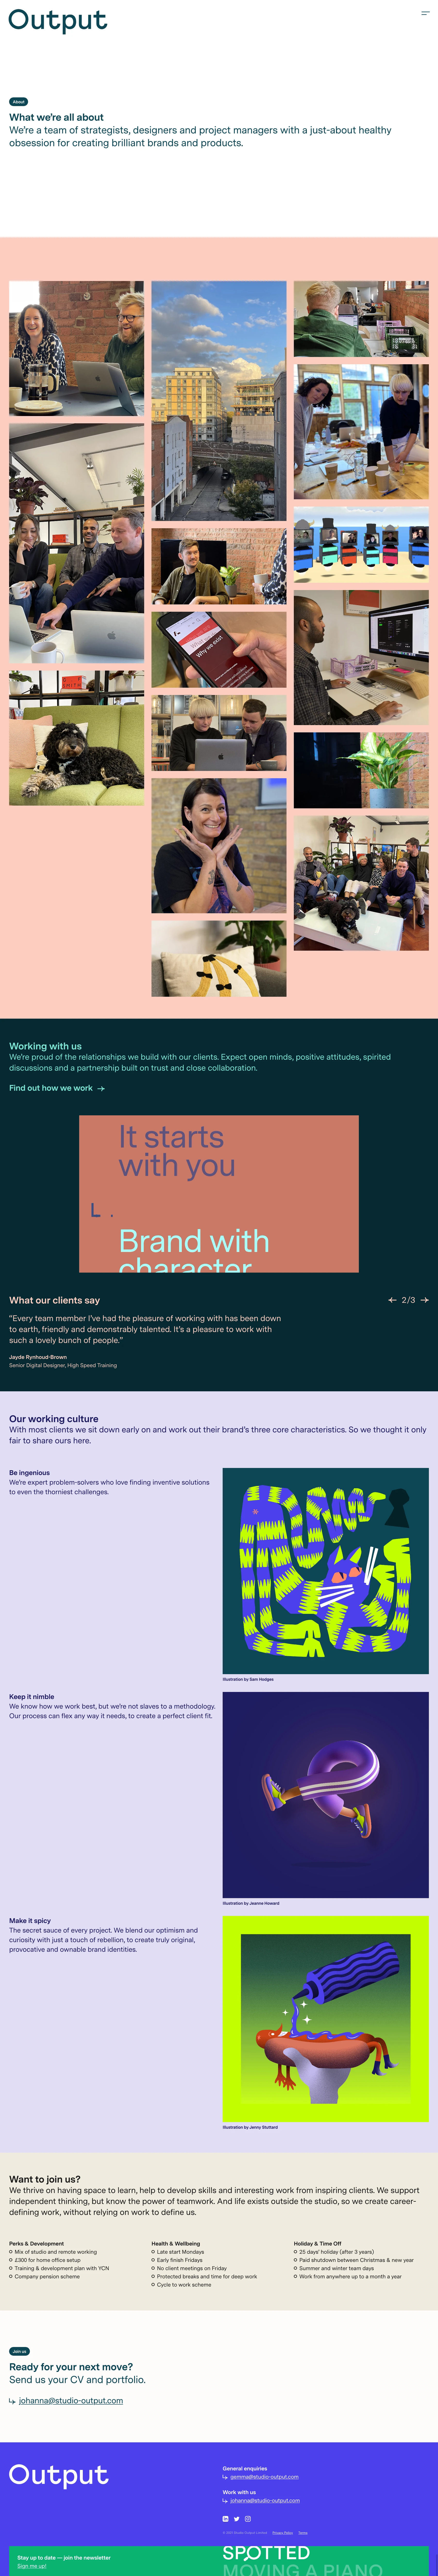 Output Landing Page Example: Output is a design agency making brand identities and digital experiences for ambitious people with a mission.